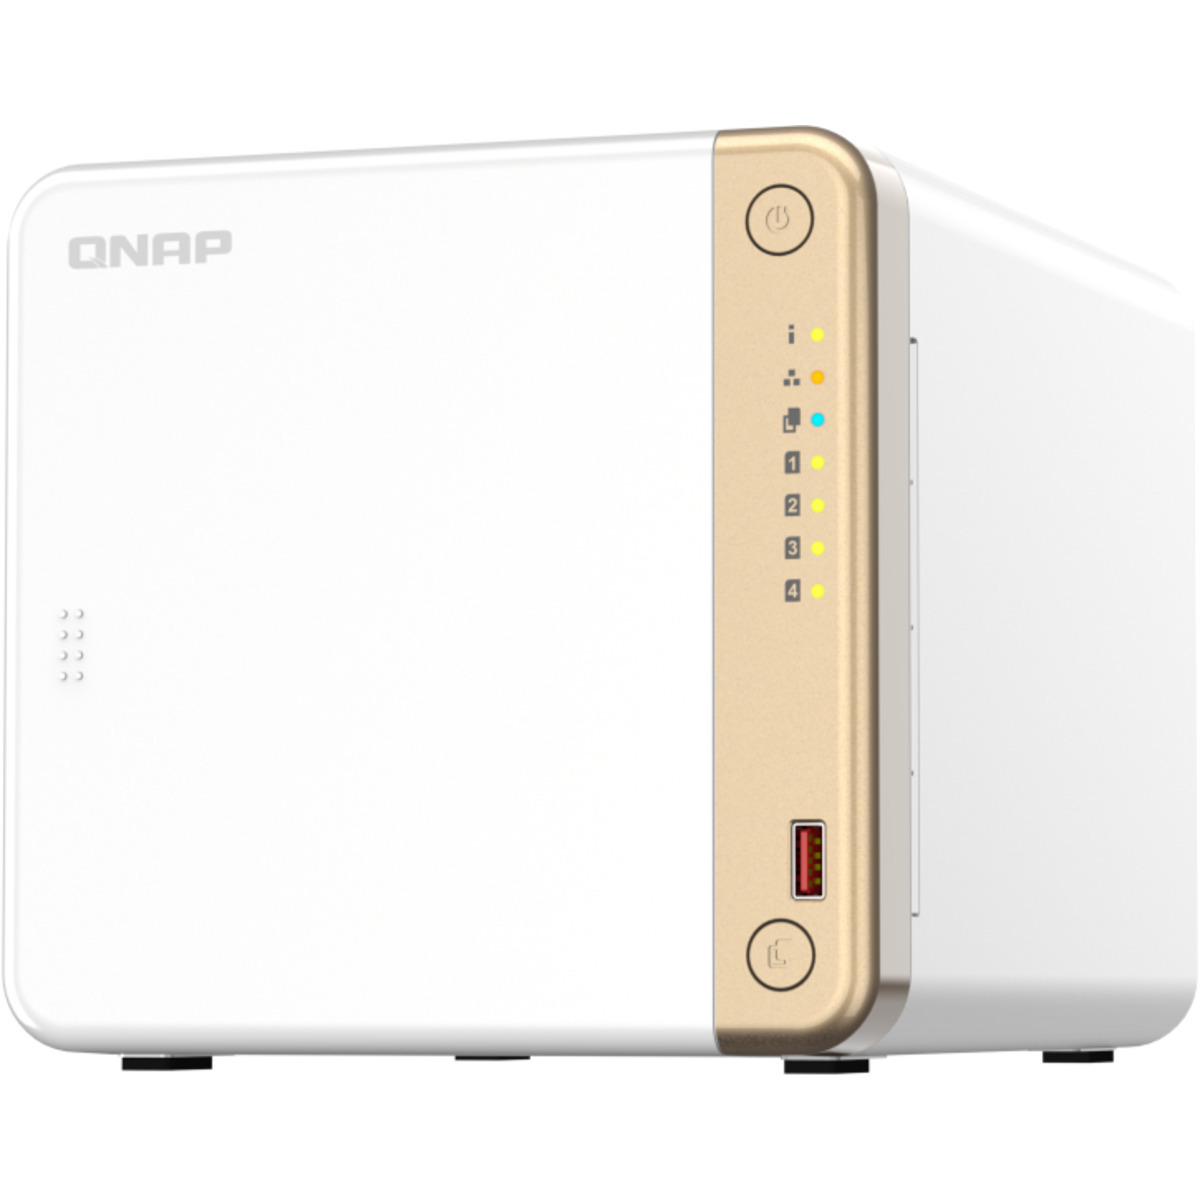 QNAP TS-462 48tb 4-Bay Desktop Multimedia / Power User / Business NAS - Network Attached Storage Device 4x12tb Seagate IronWolf Pro ST12000NT001 3.5 7200rpm SATA 6Gb/s HDD NAS Class Drives Installed - Burn-In Tested - ON SALE TS-462